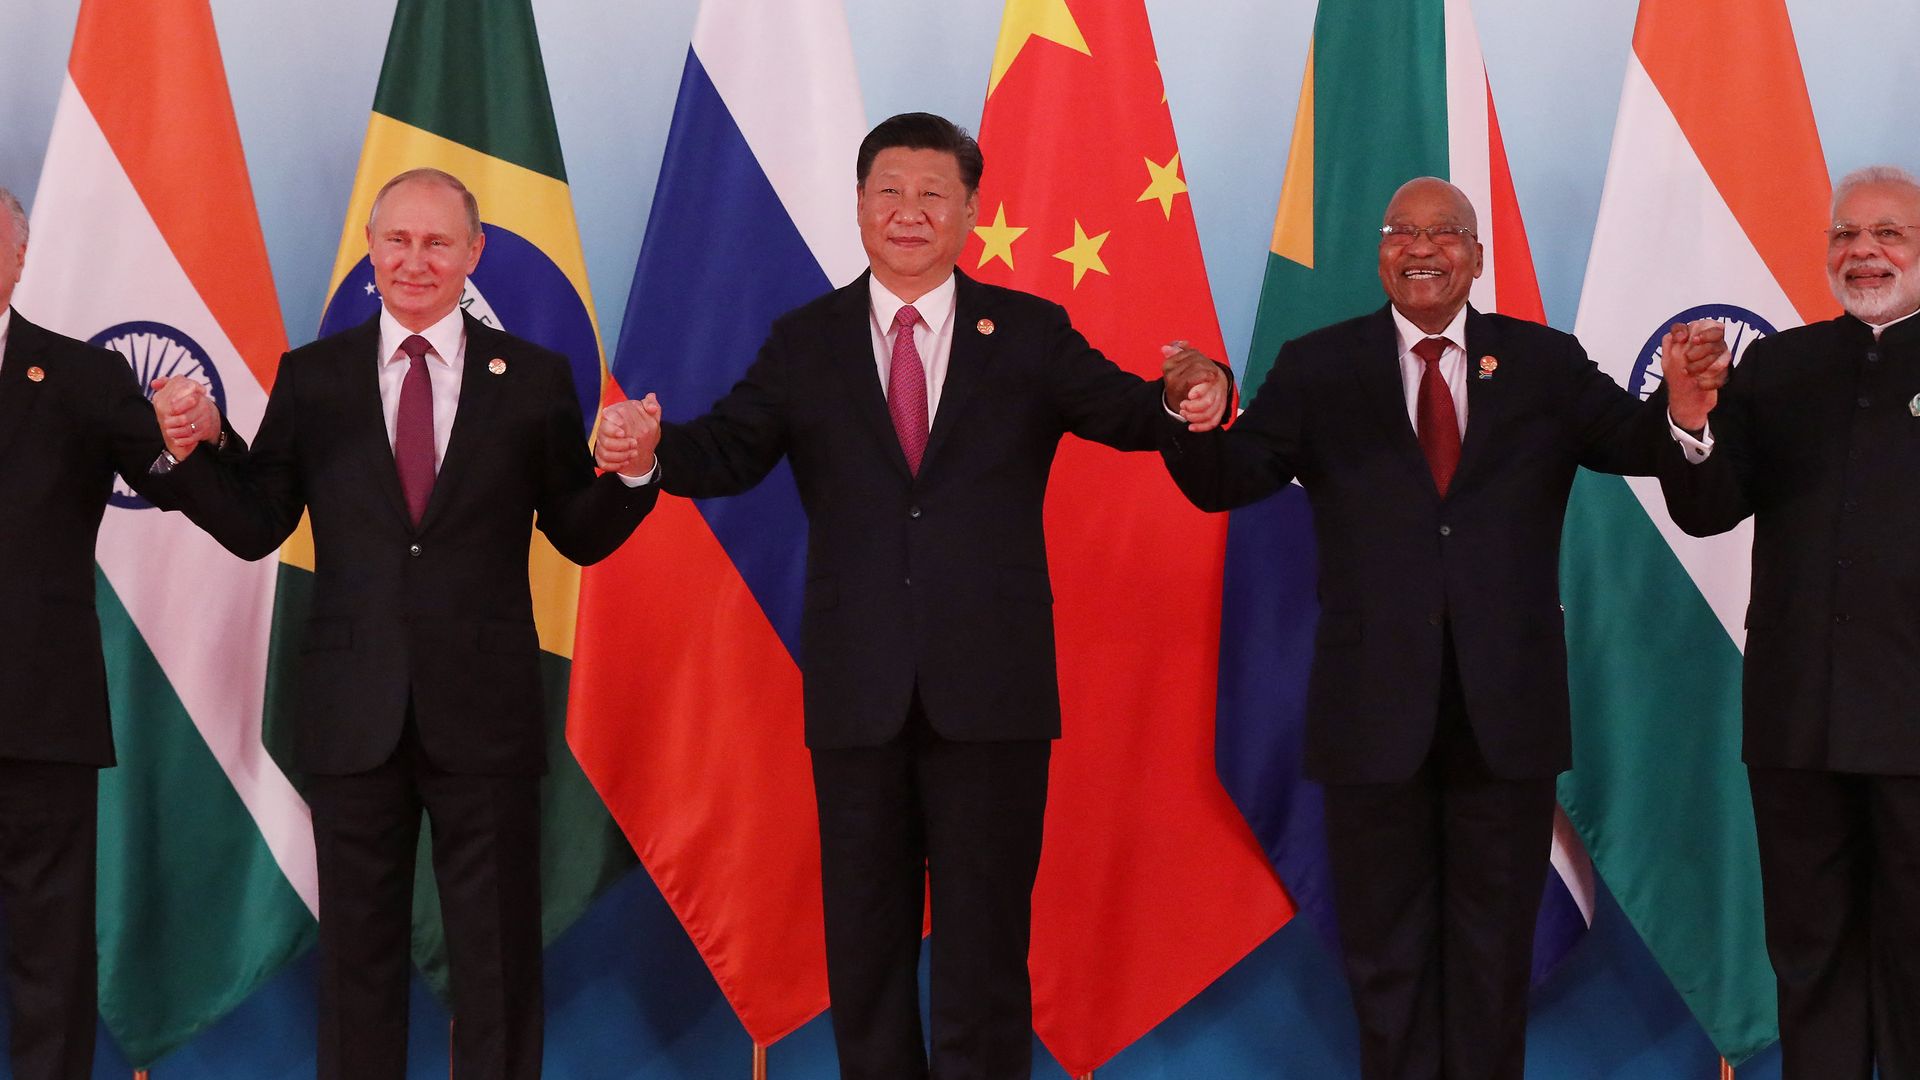 The BRICS summit will pass without substantial changes to the U.S. dollar's status as the leading global currency.